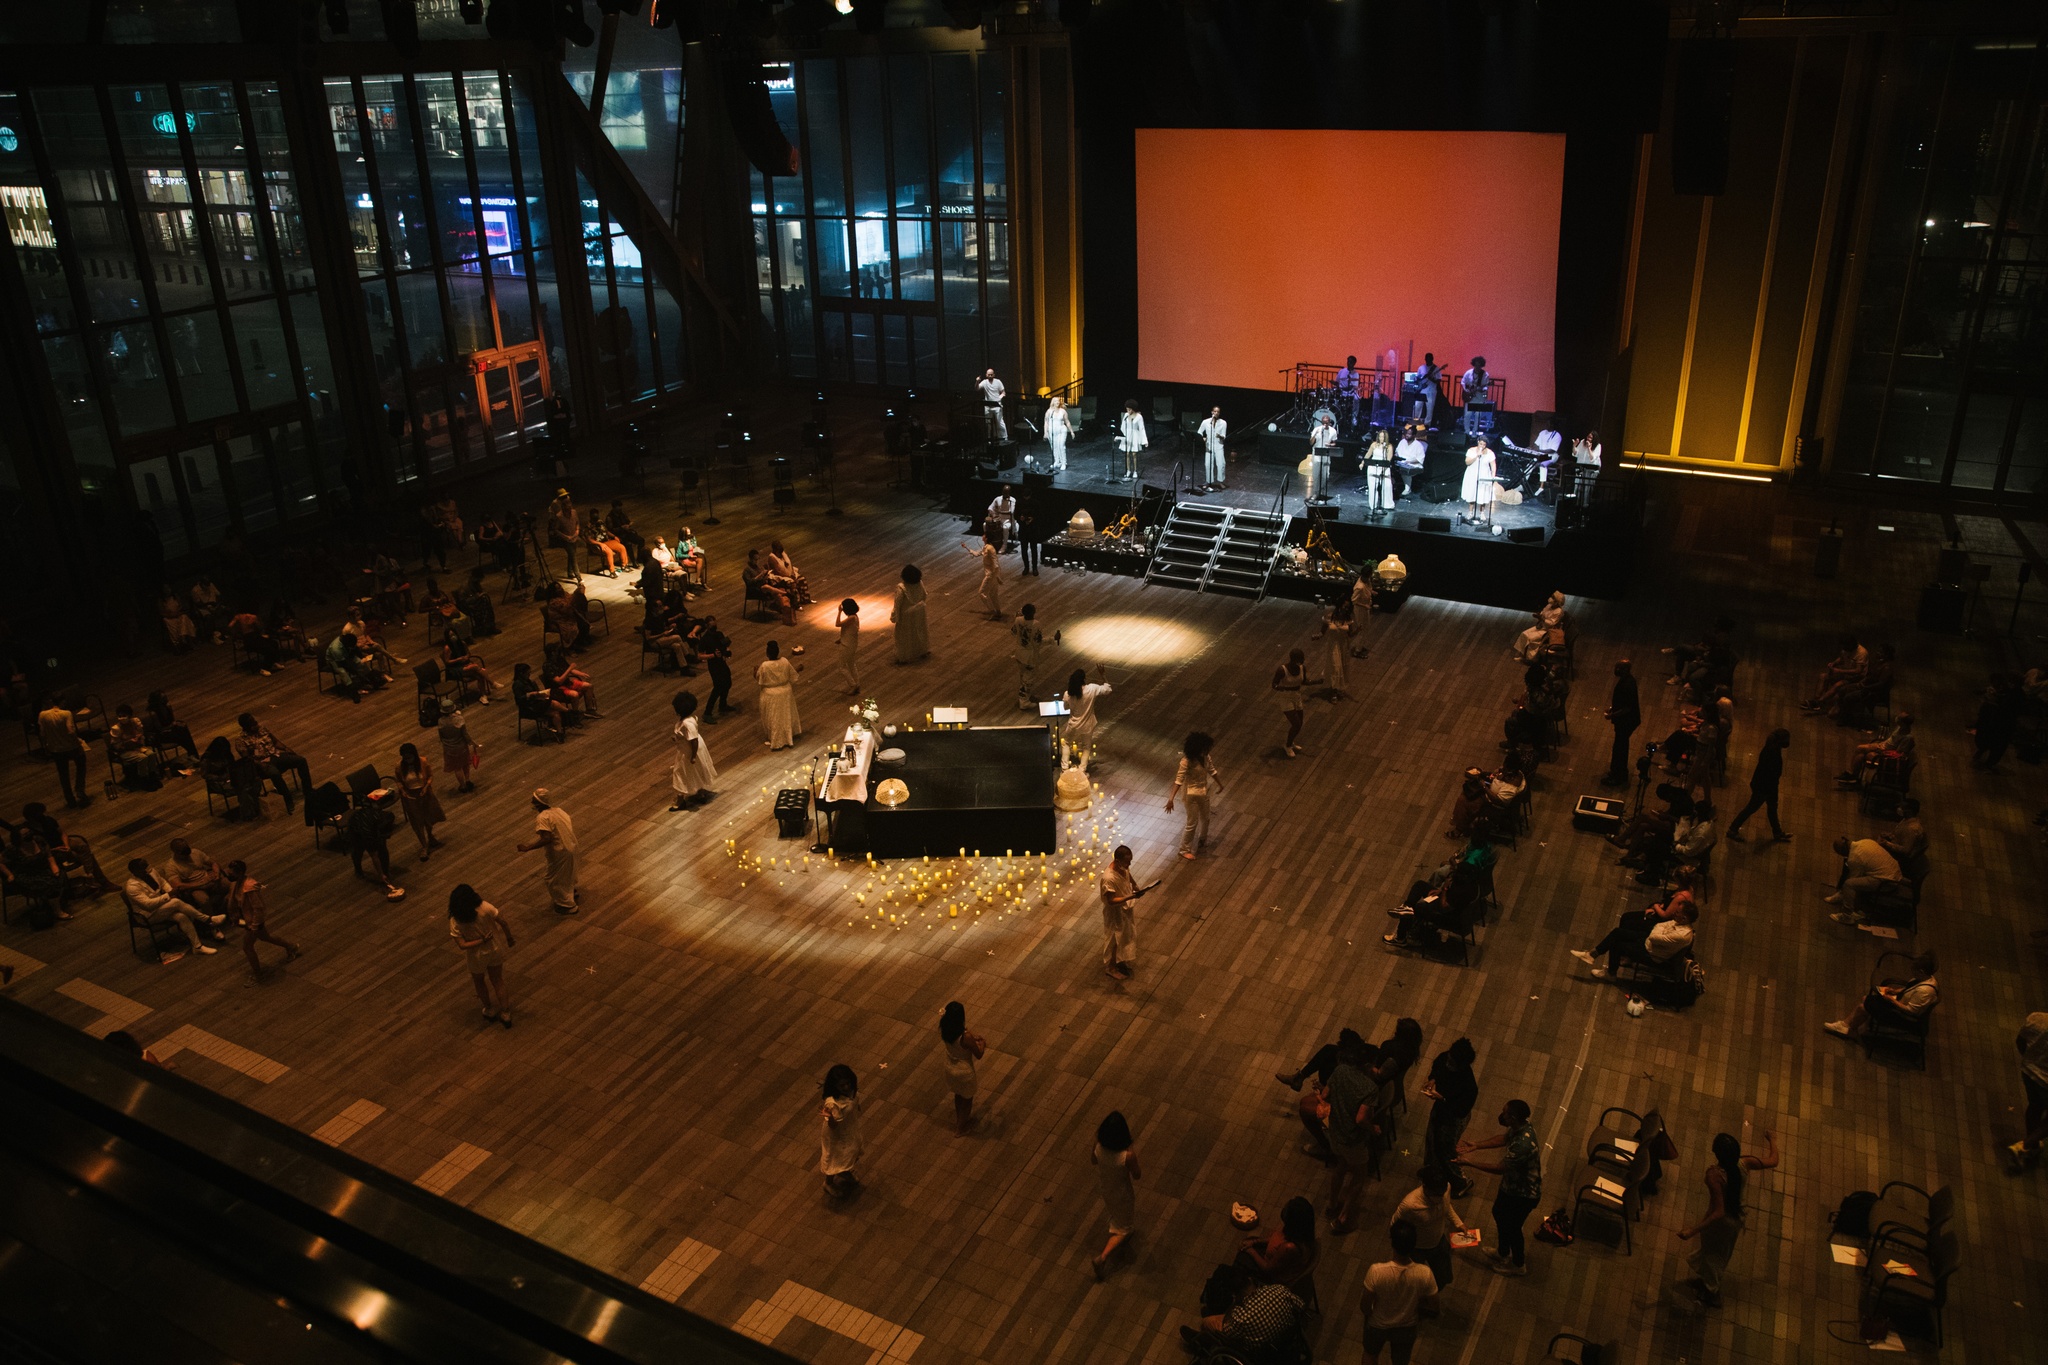 A piano and small black stage in the center of a large space with candles arranged in a circle around them. Performers line either side of the space with audience seated in shadow. A line of performers stands on a larger stage at the top of the space.